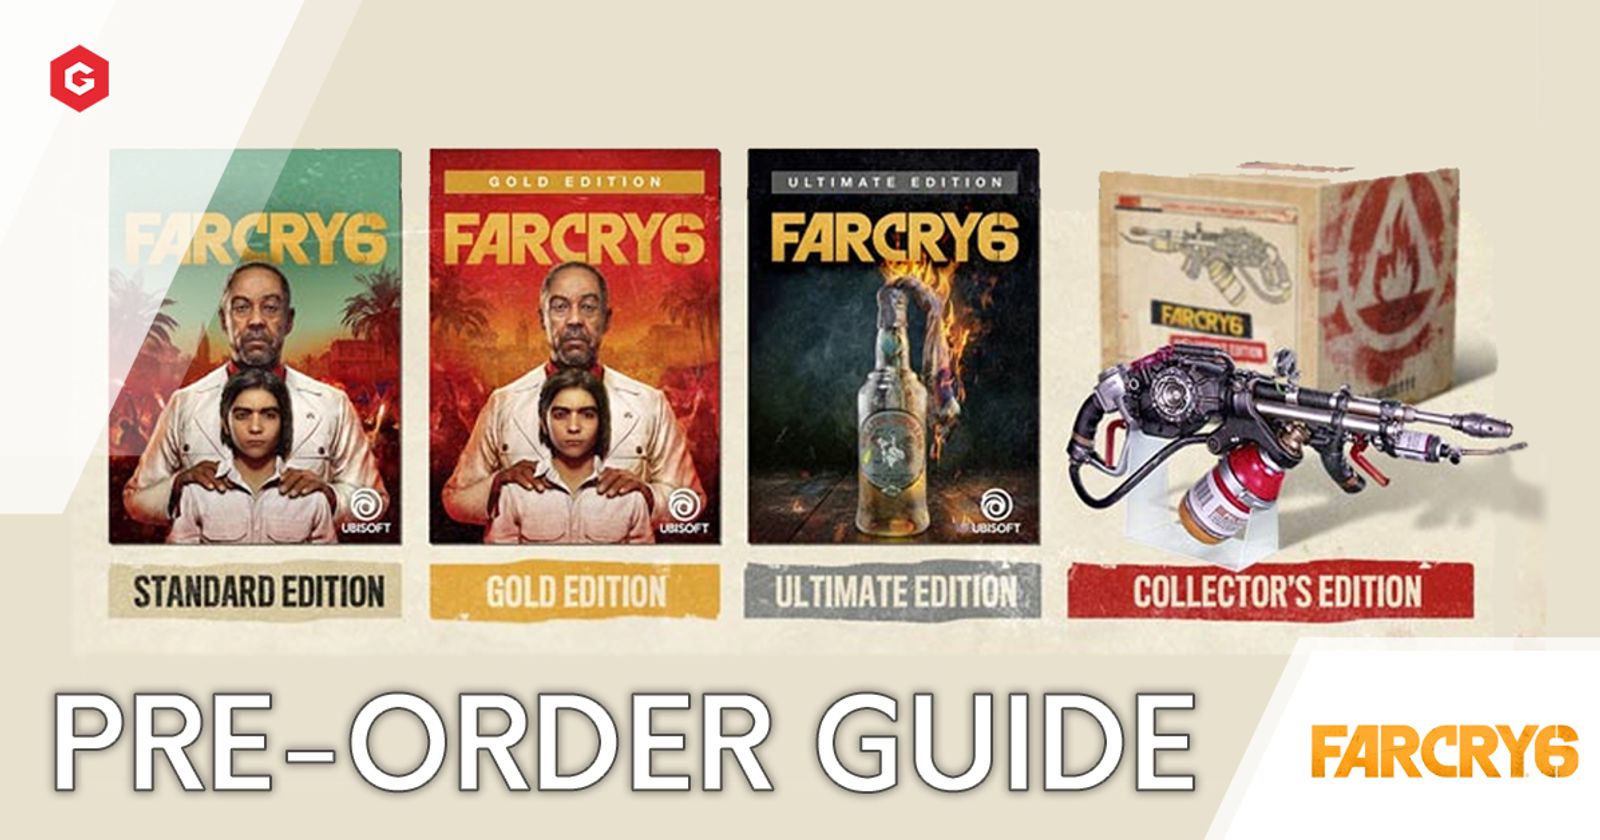 Far Cry 6 - Gold Edition (PS5) Trophy Guides and PSN Price History